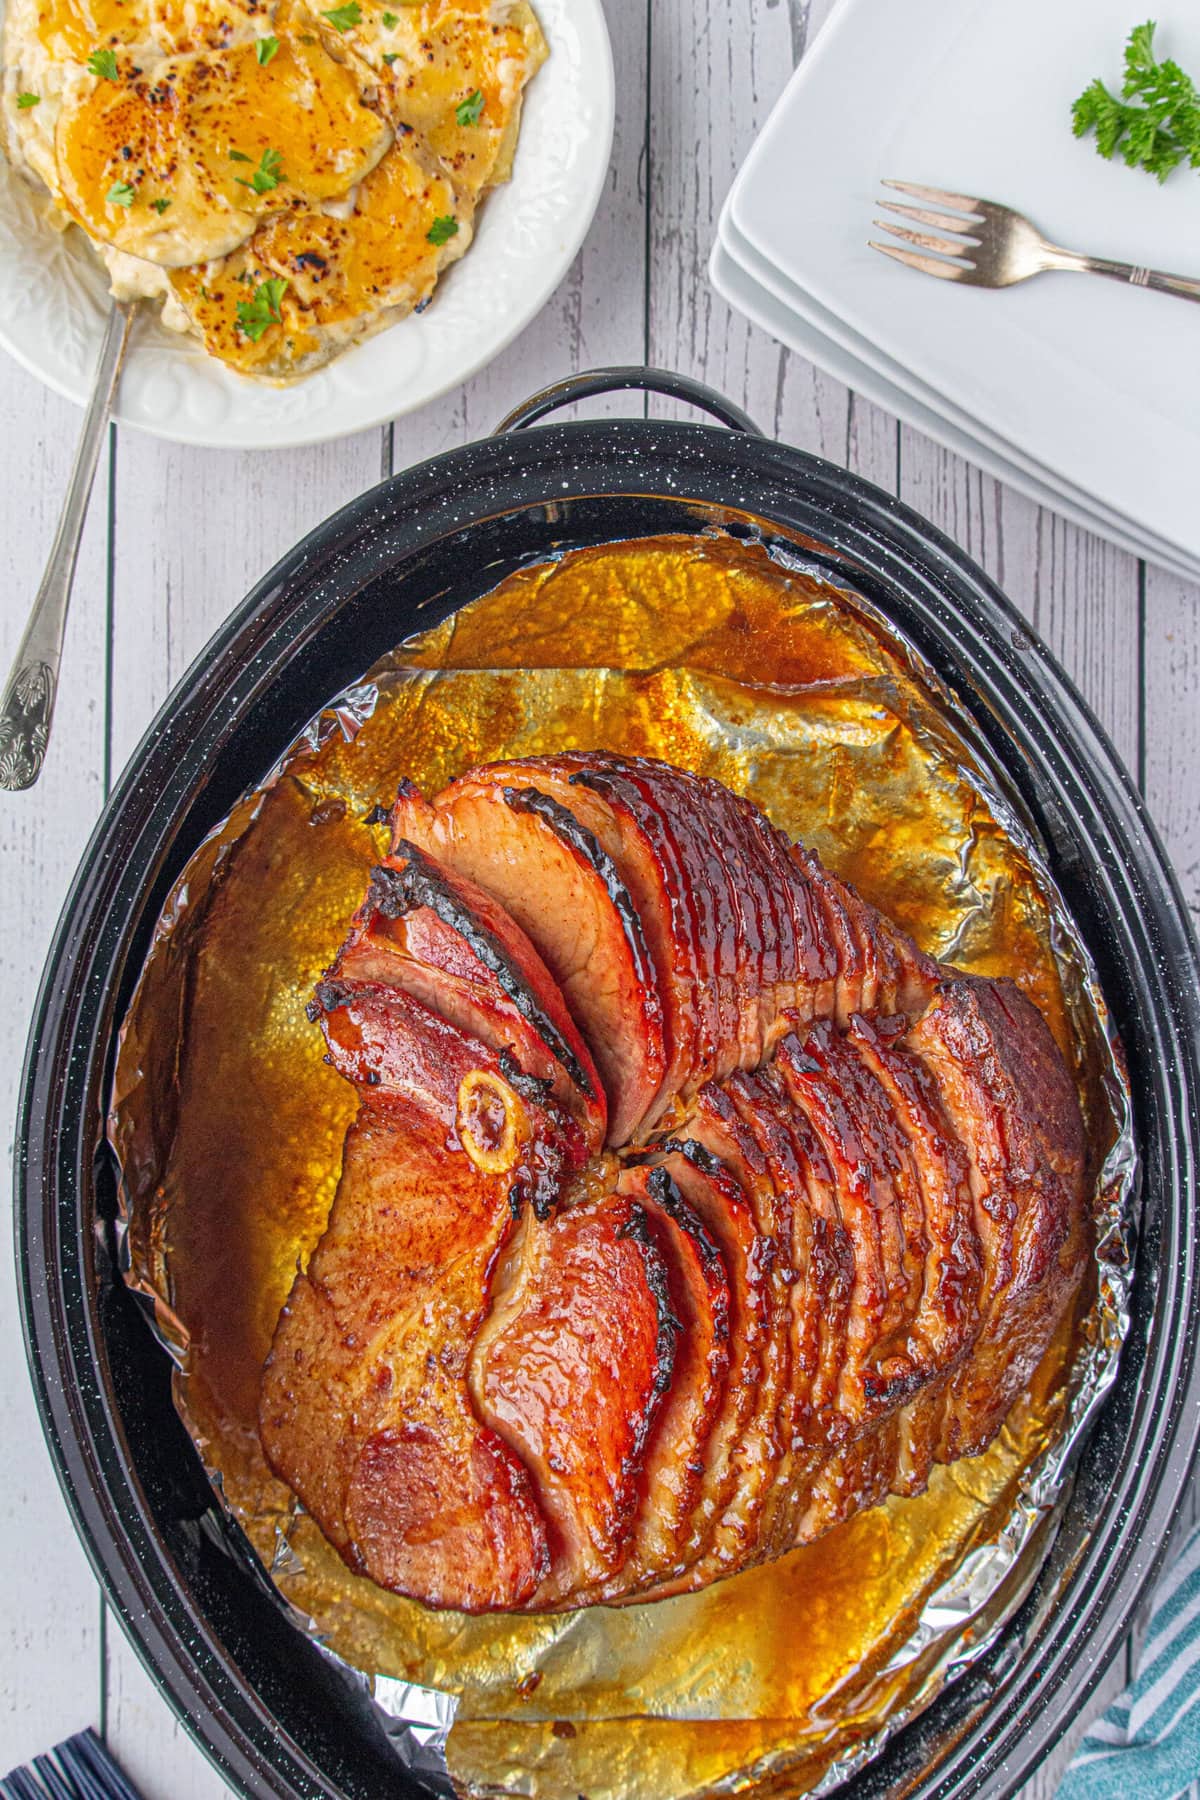 An overhead photo of the ham, glazed with cola, sliced with caramelized edges.